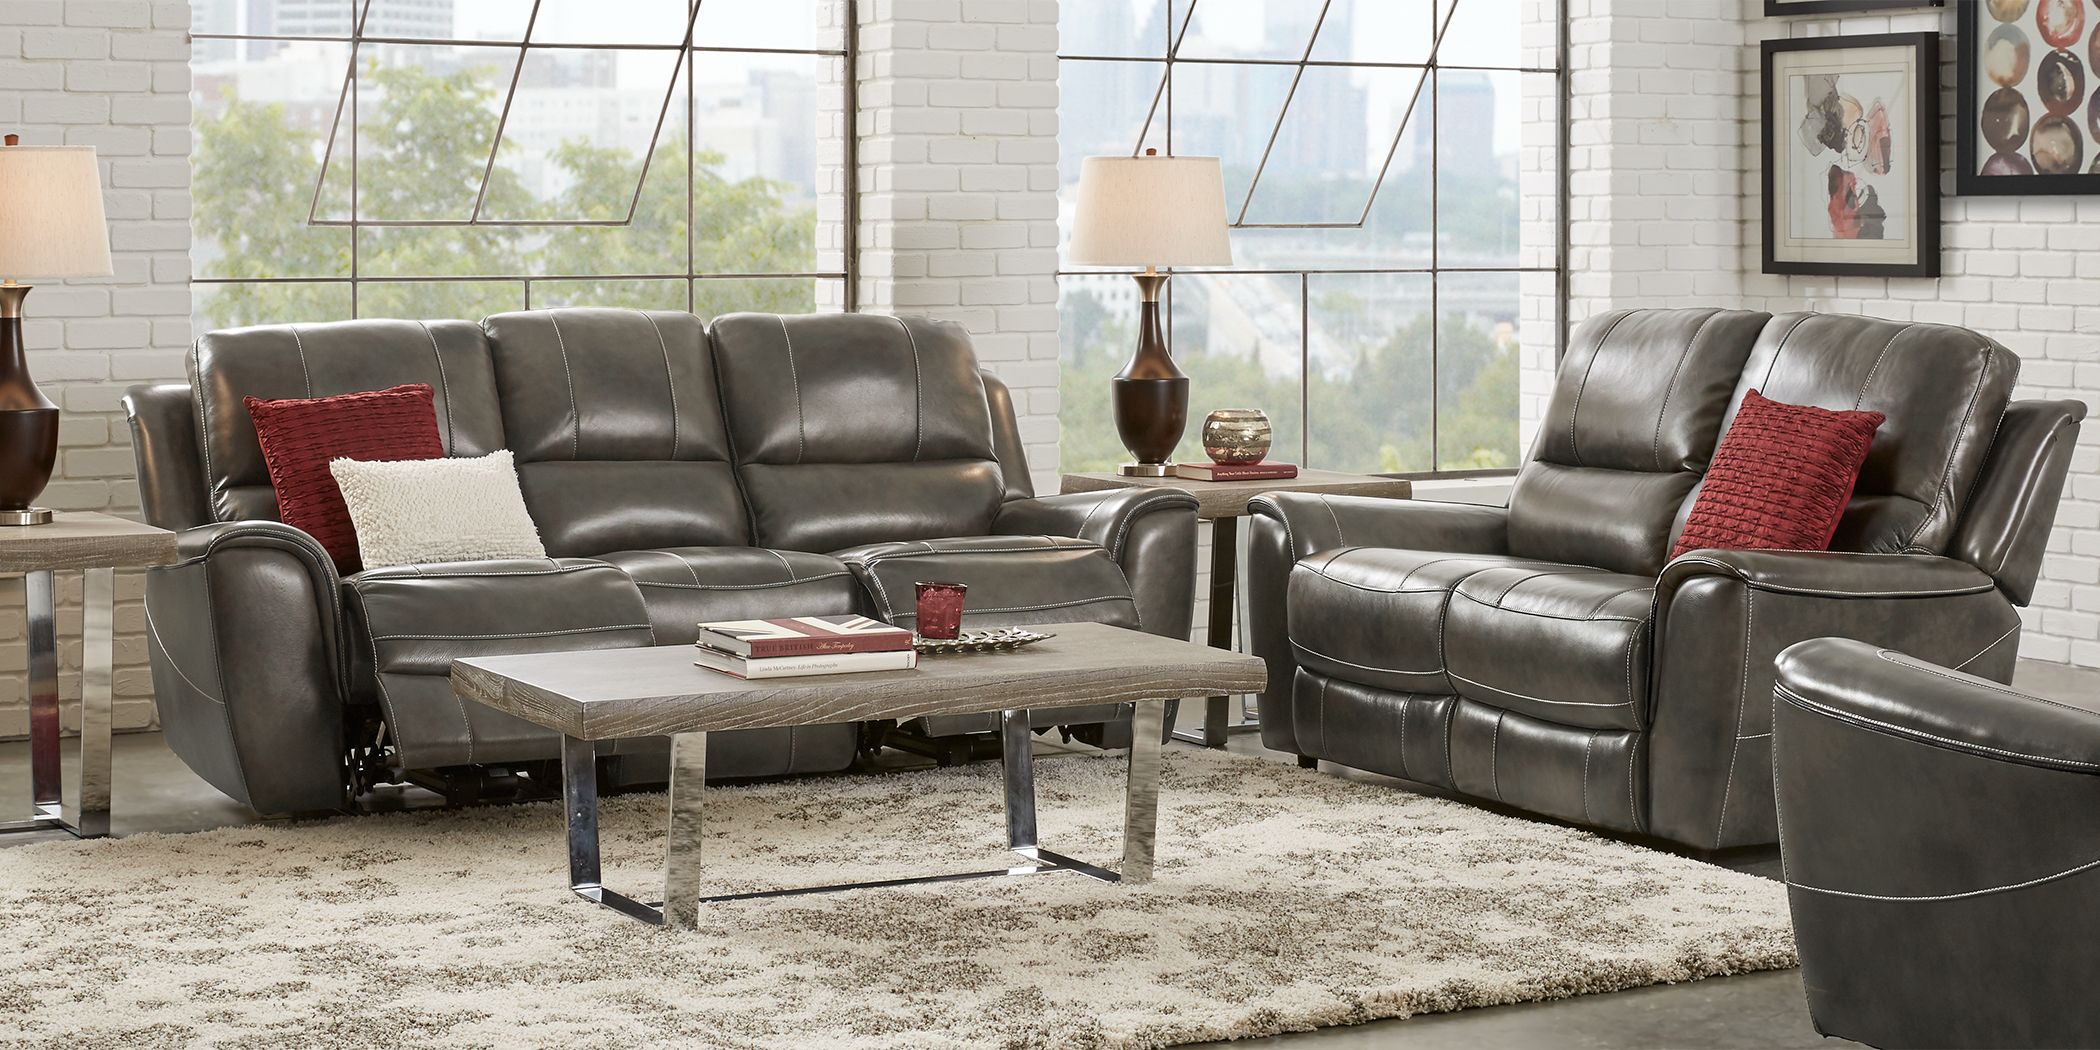 Https Wwwroomstogocom Furniture Product Lanzo Gray Leather 3 Pc Living Room With Reclining Sofa 1152880P